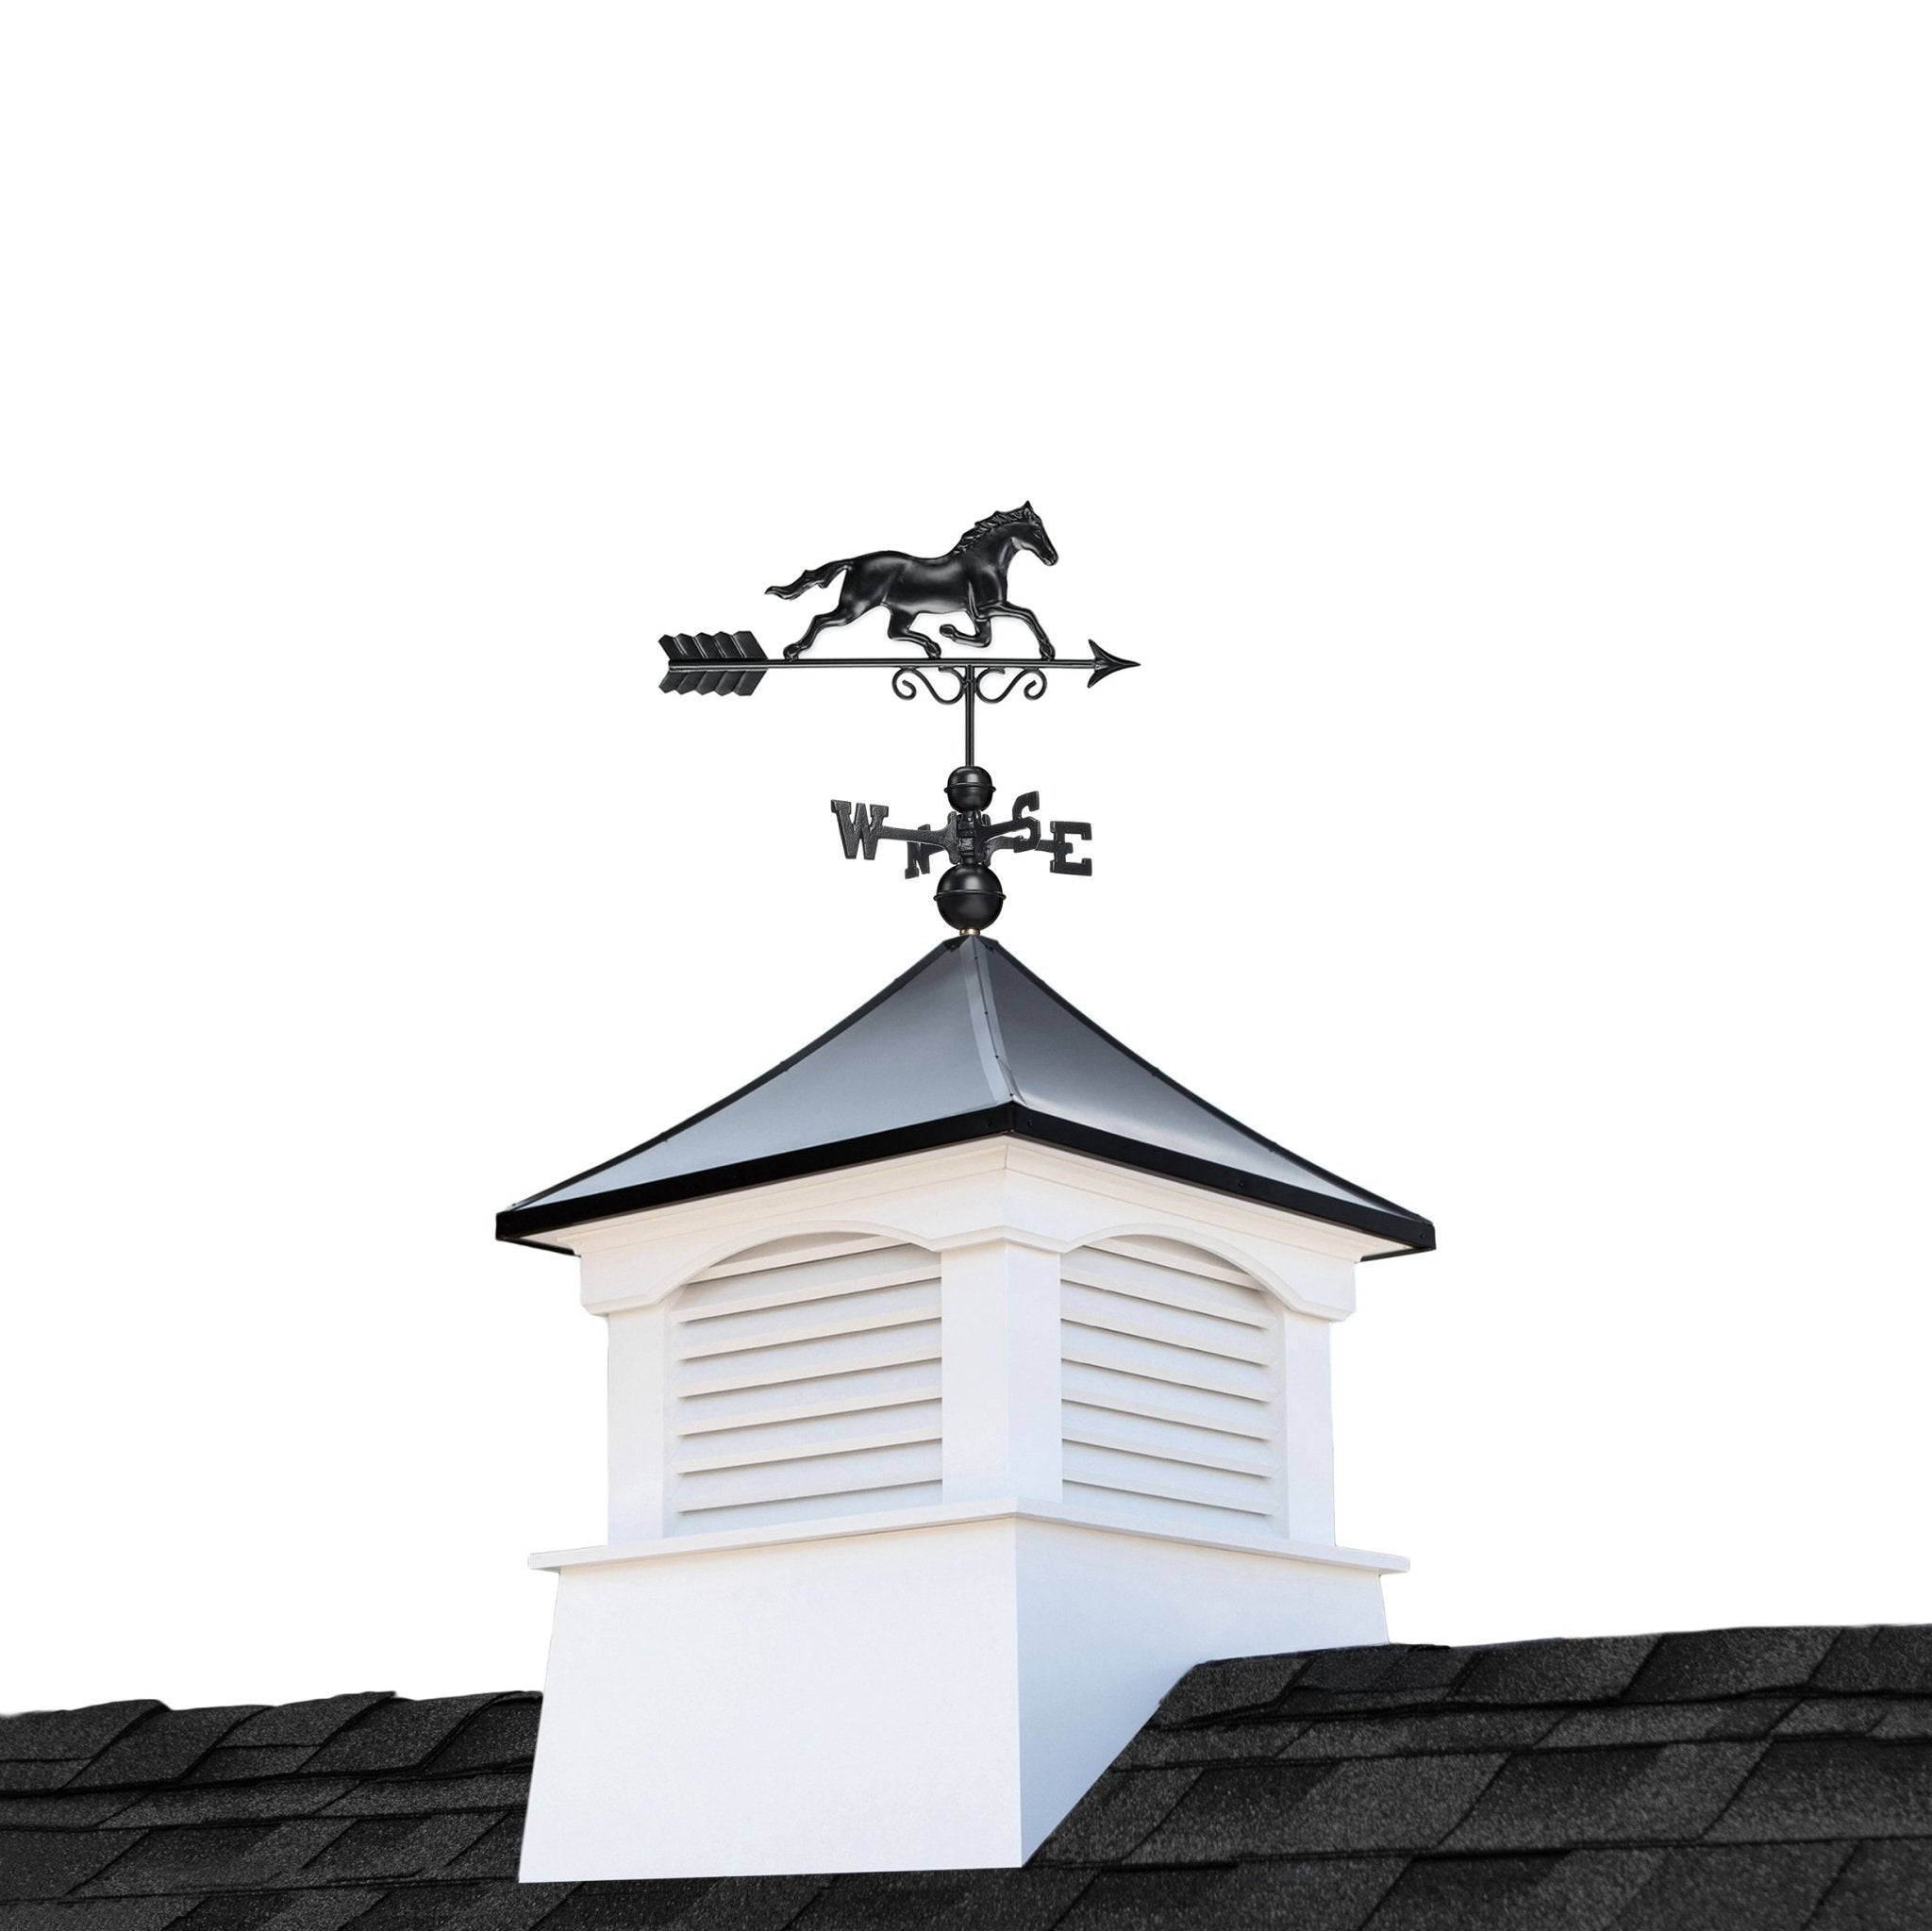 30" Square Coventry Vinyl Cupola with Black Aluminum roof and Black Aluminum Horse Weathervane - Good Directions